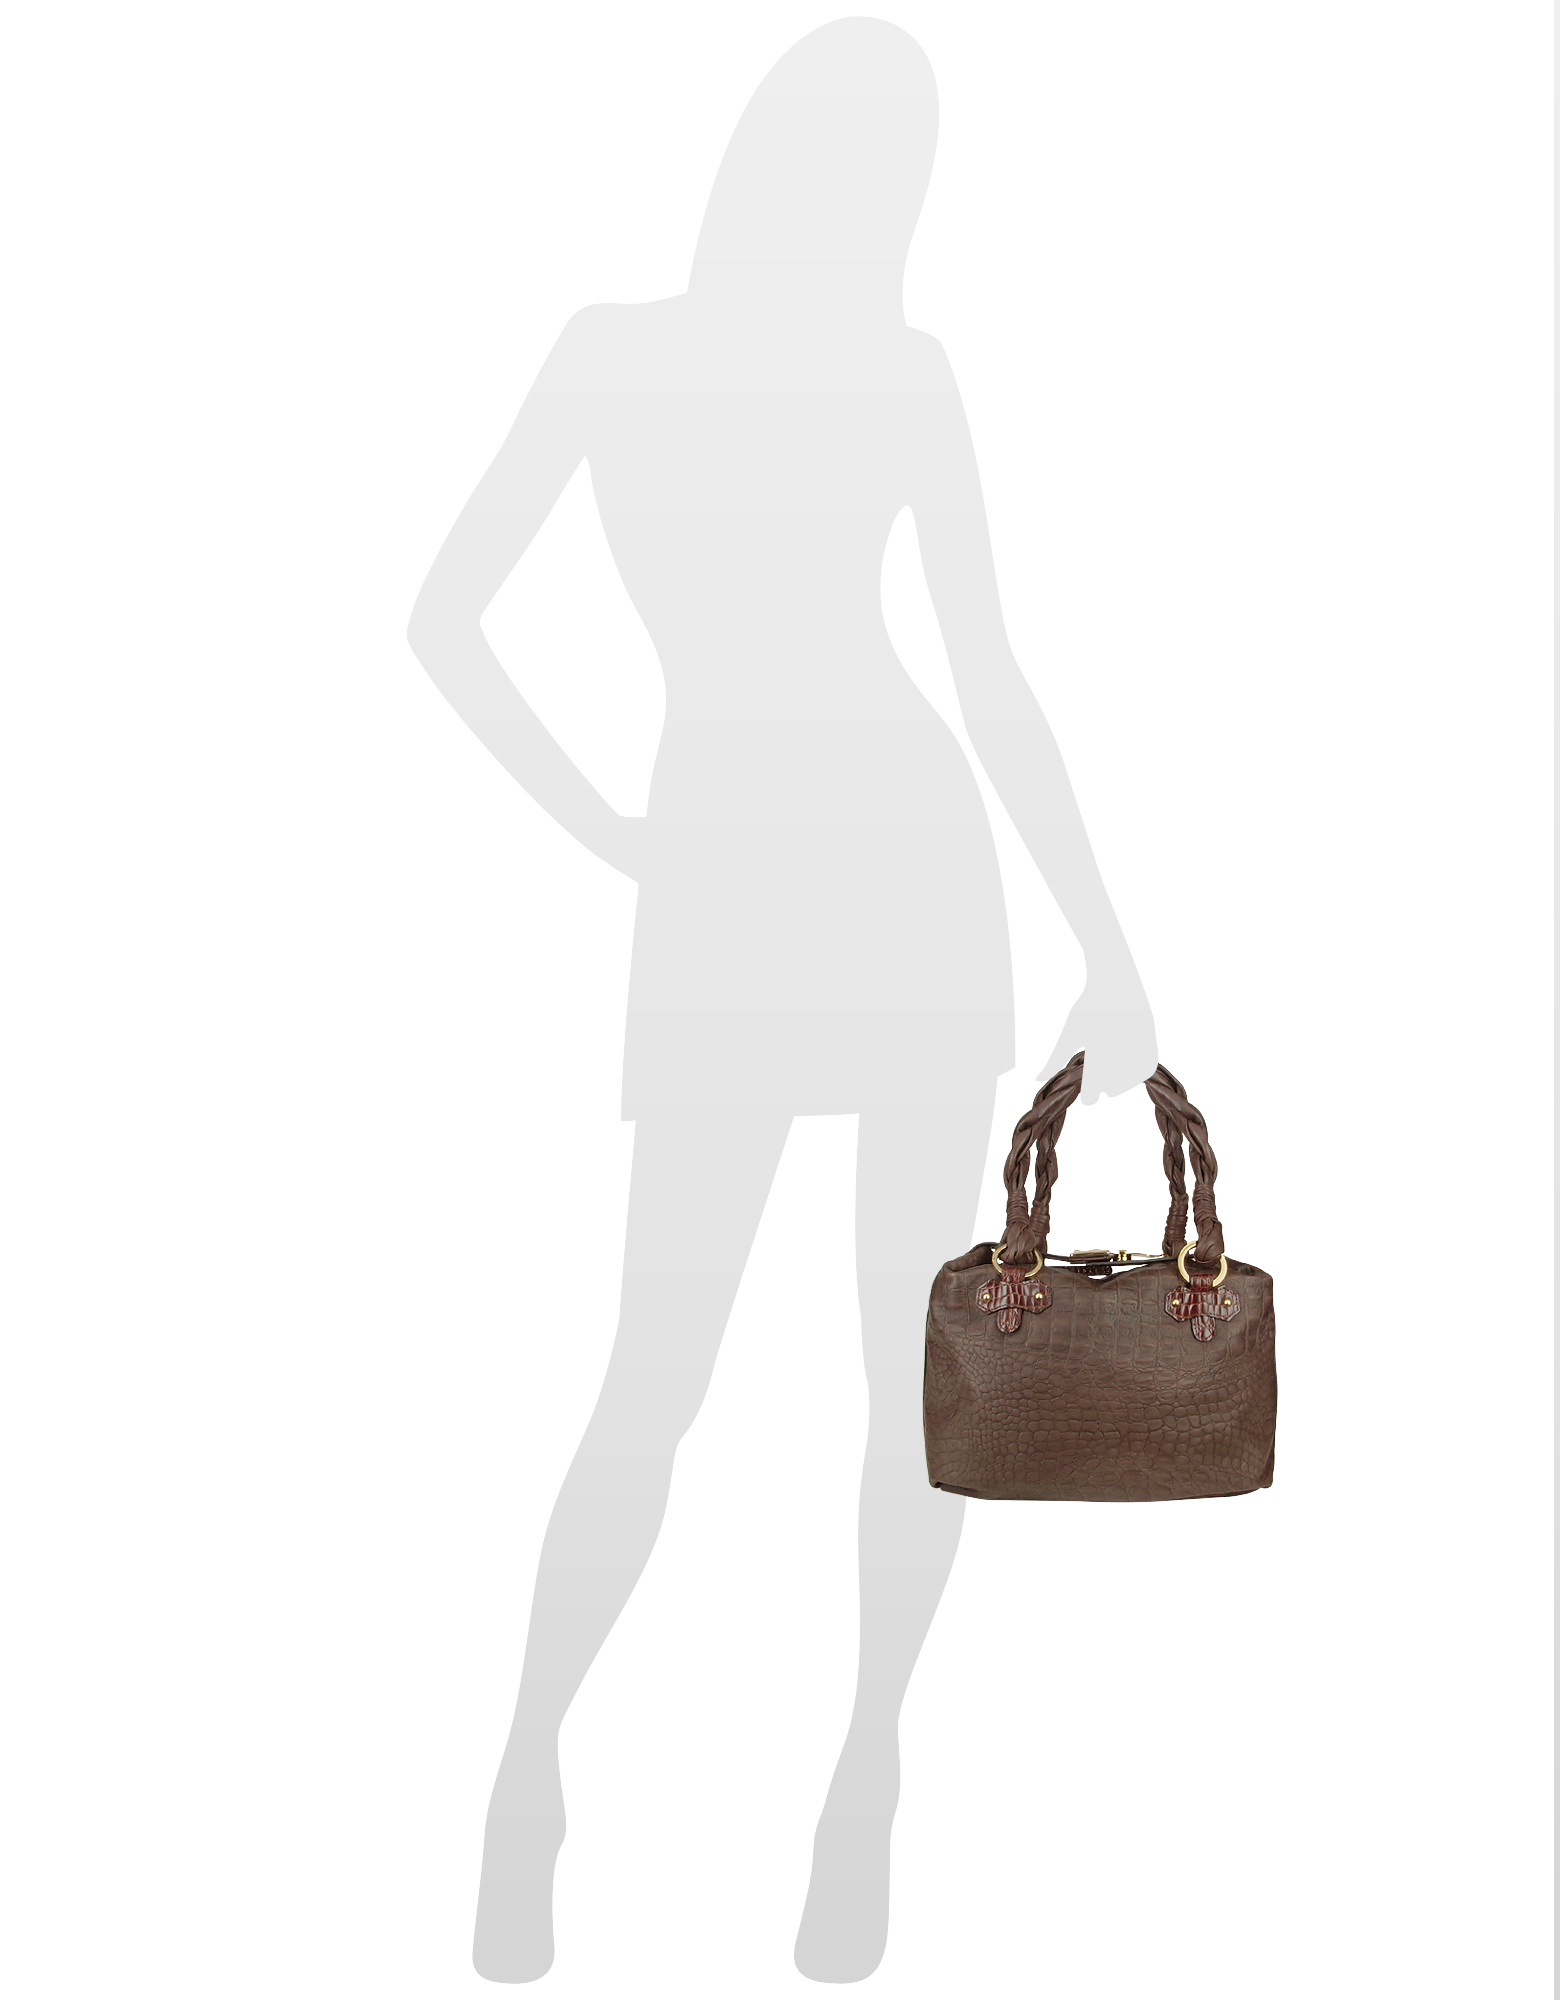 Fontanelli Brown Croco-stamped Italian Leather Tote Bag at FORZIERI